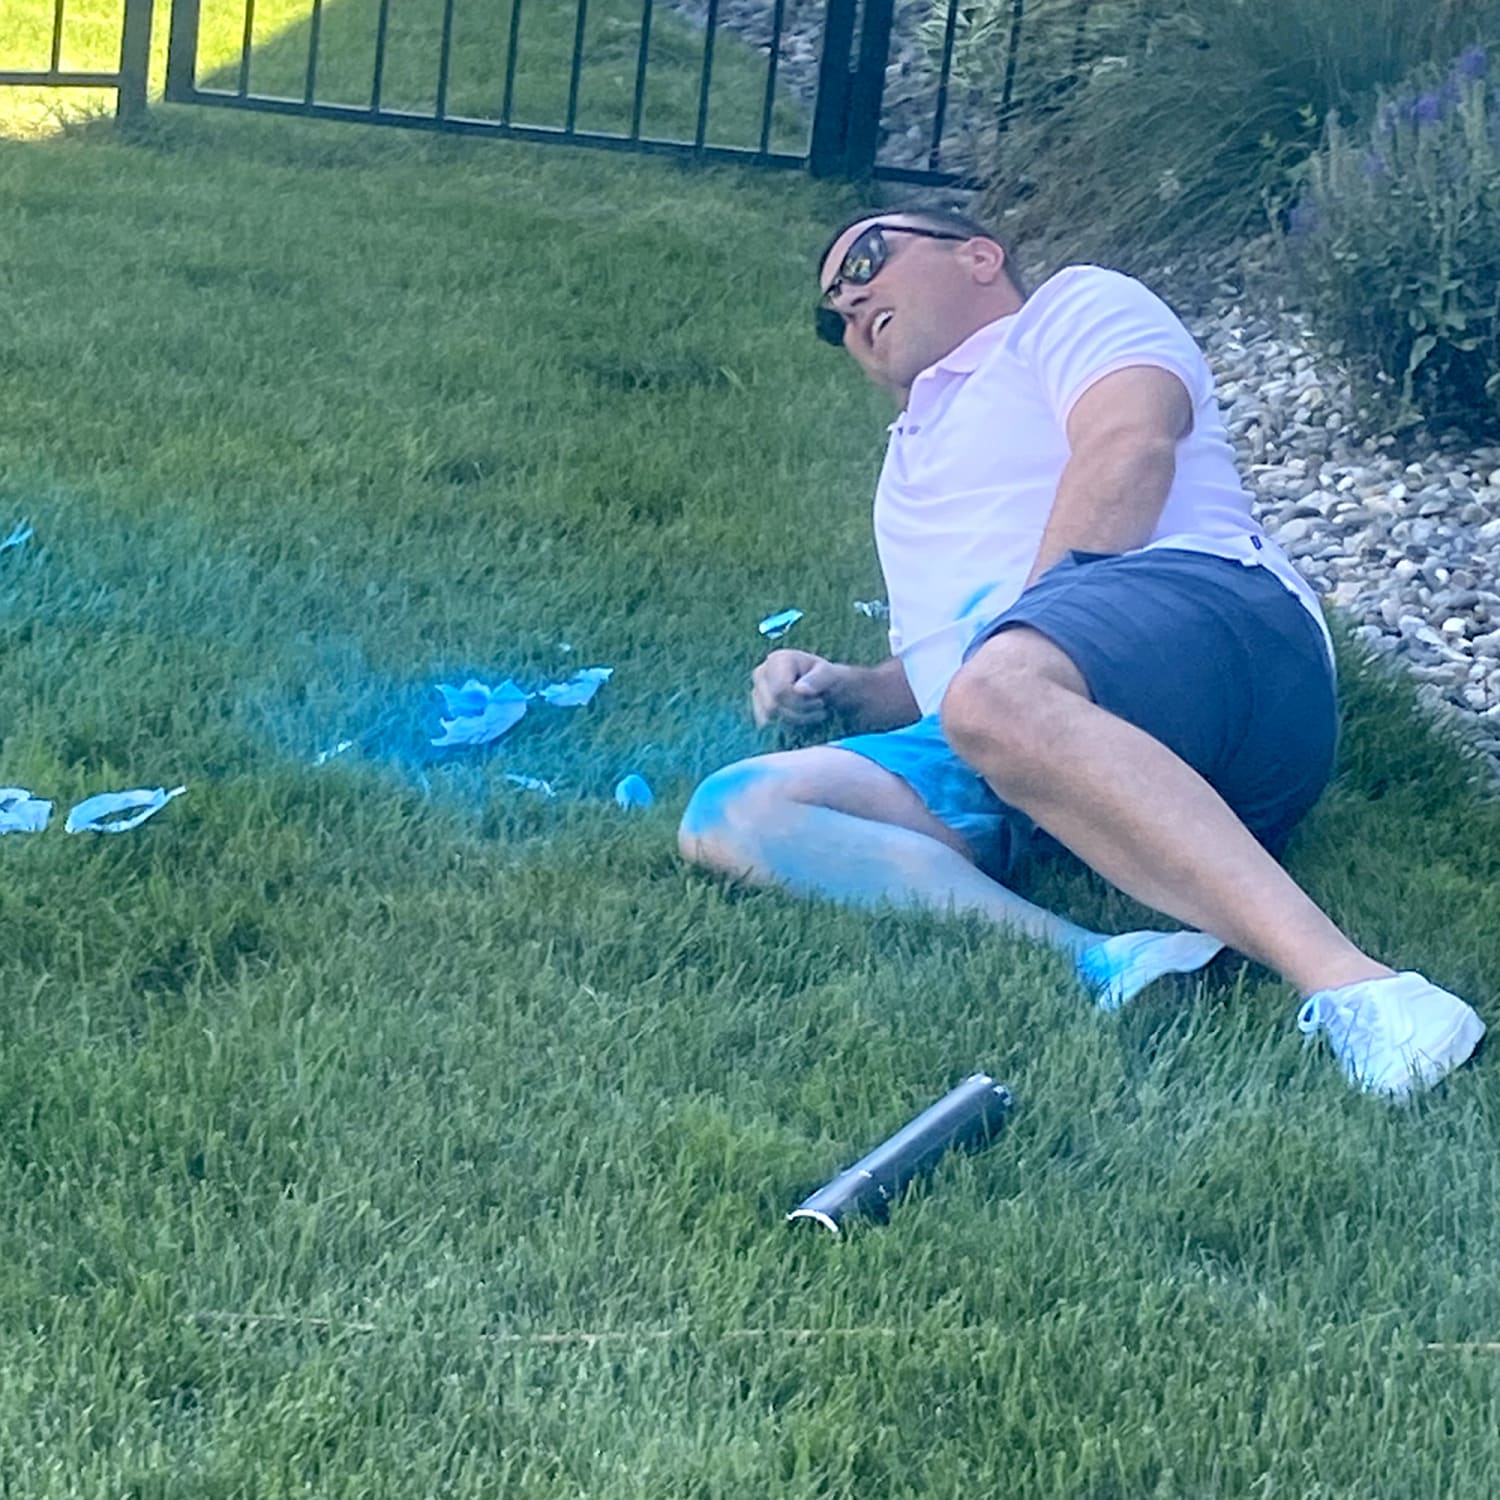 Massachusetts dad hit in crotch in gender reveal fail video